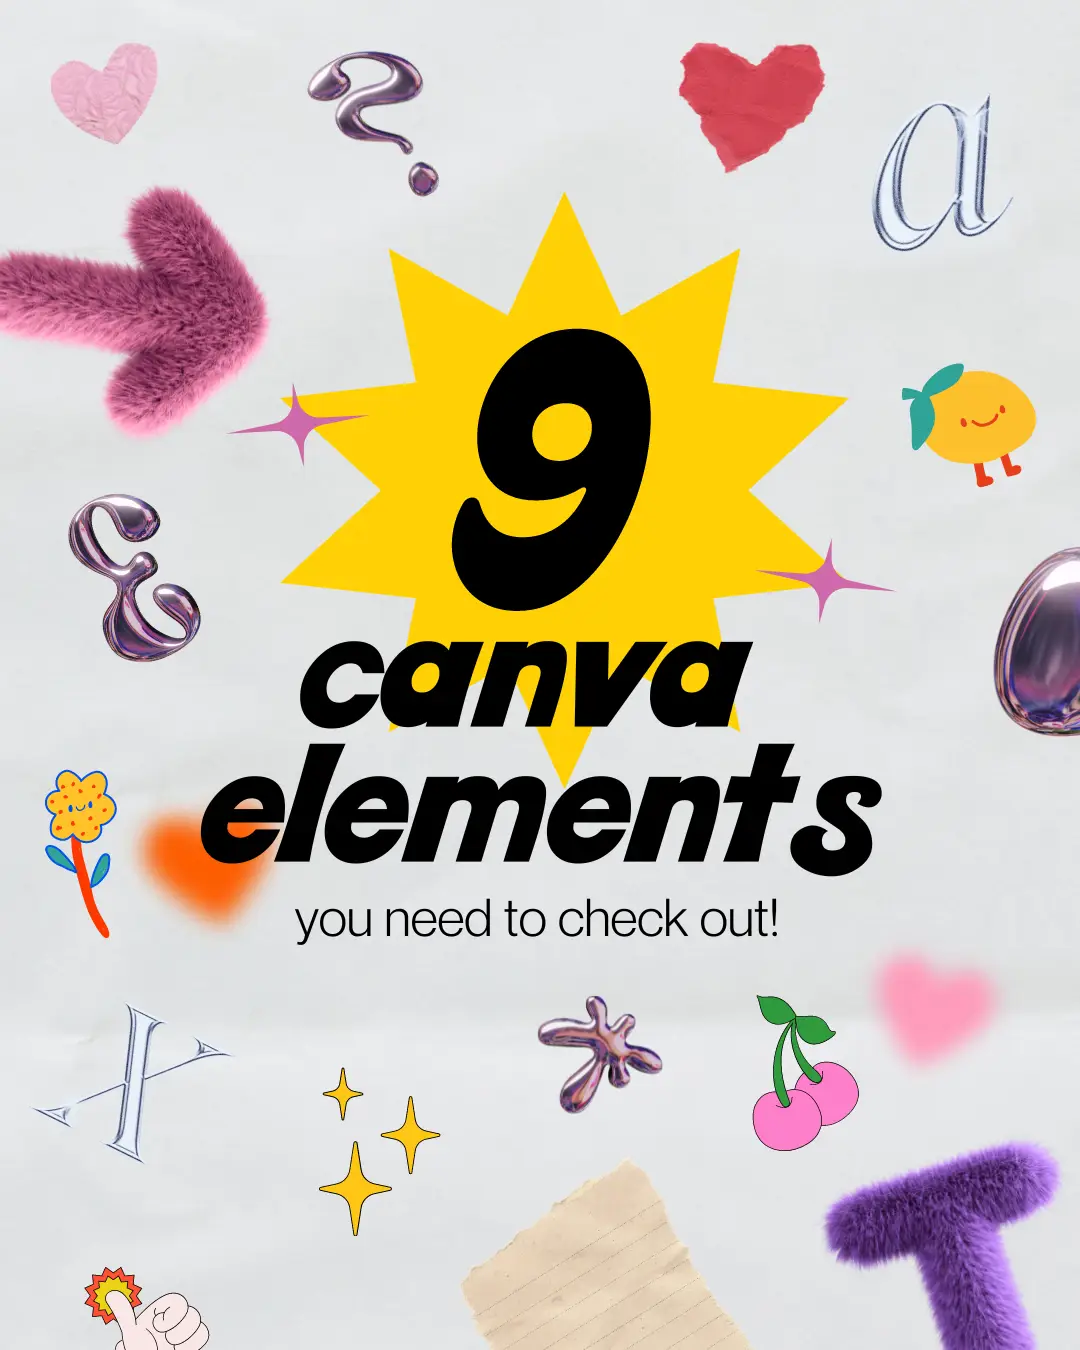 9 CANVA elements you need to check out 👀's images(0)